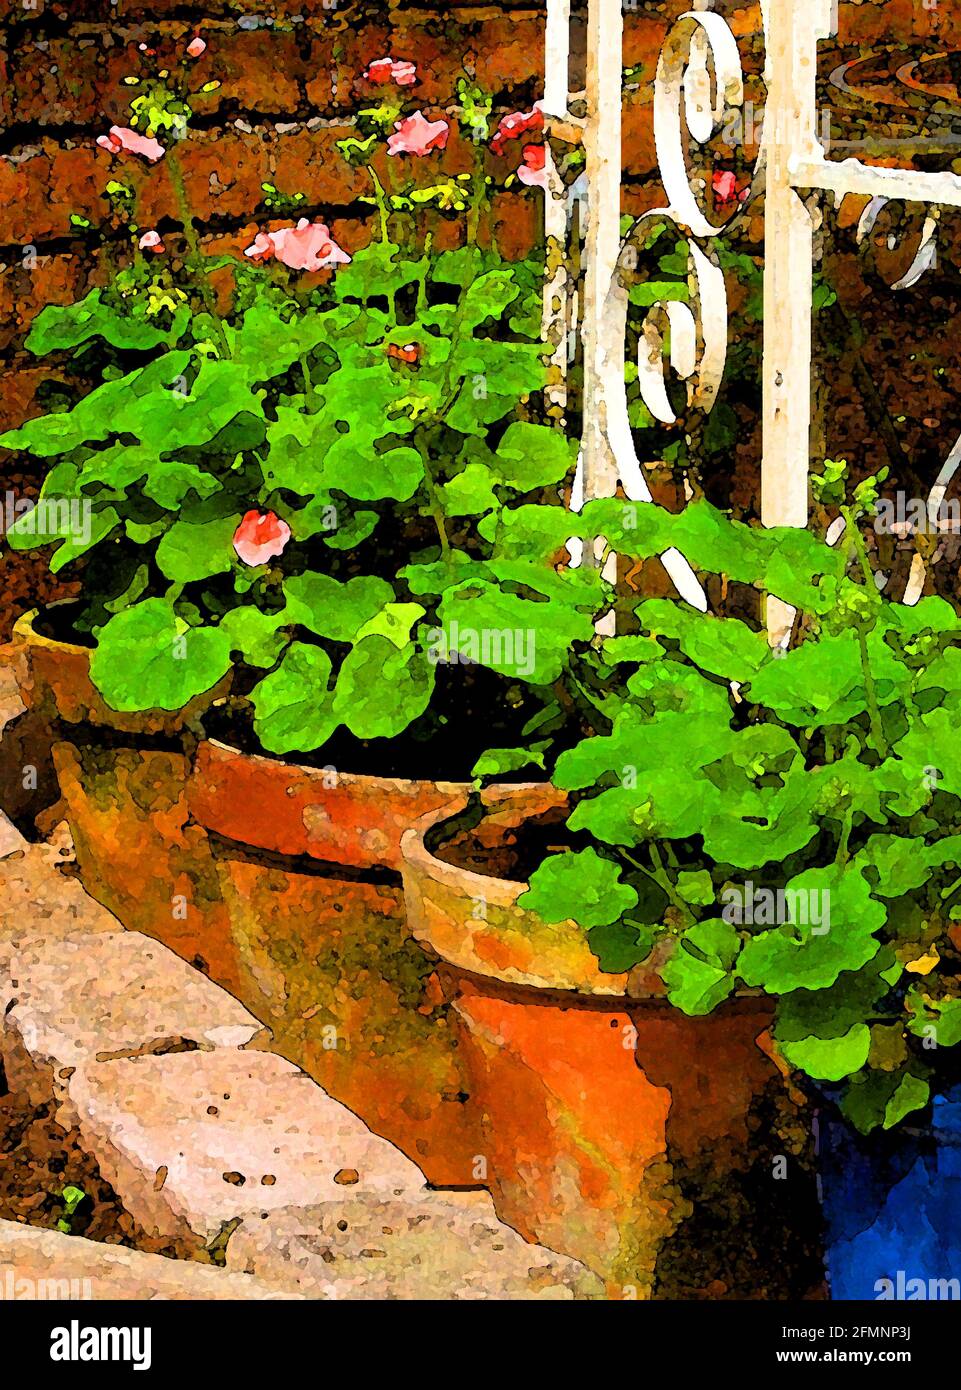 Potted Geraniums- Zonal Pelargonium (Pelargonium 'Dale Queen') One of Forty-two Iconic Images of English Garden Flowers, Wildflowers and Rural Landscapes. Stock Photo